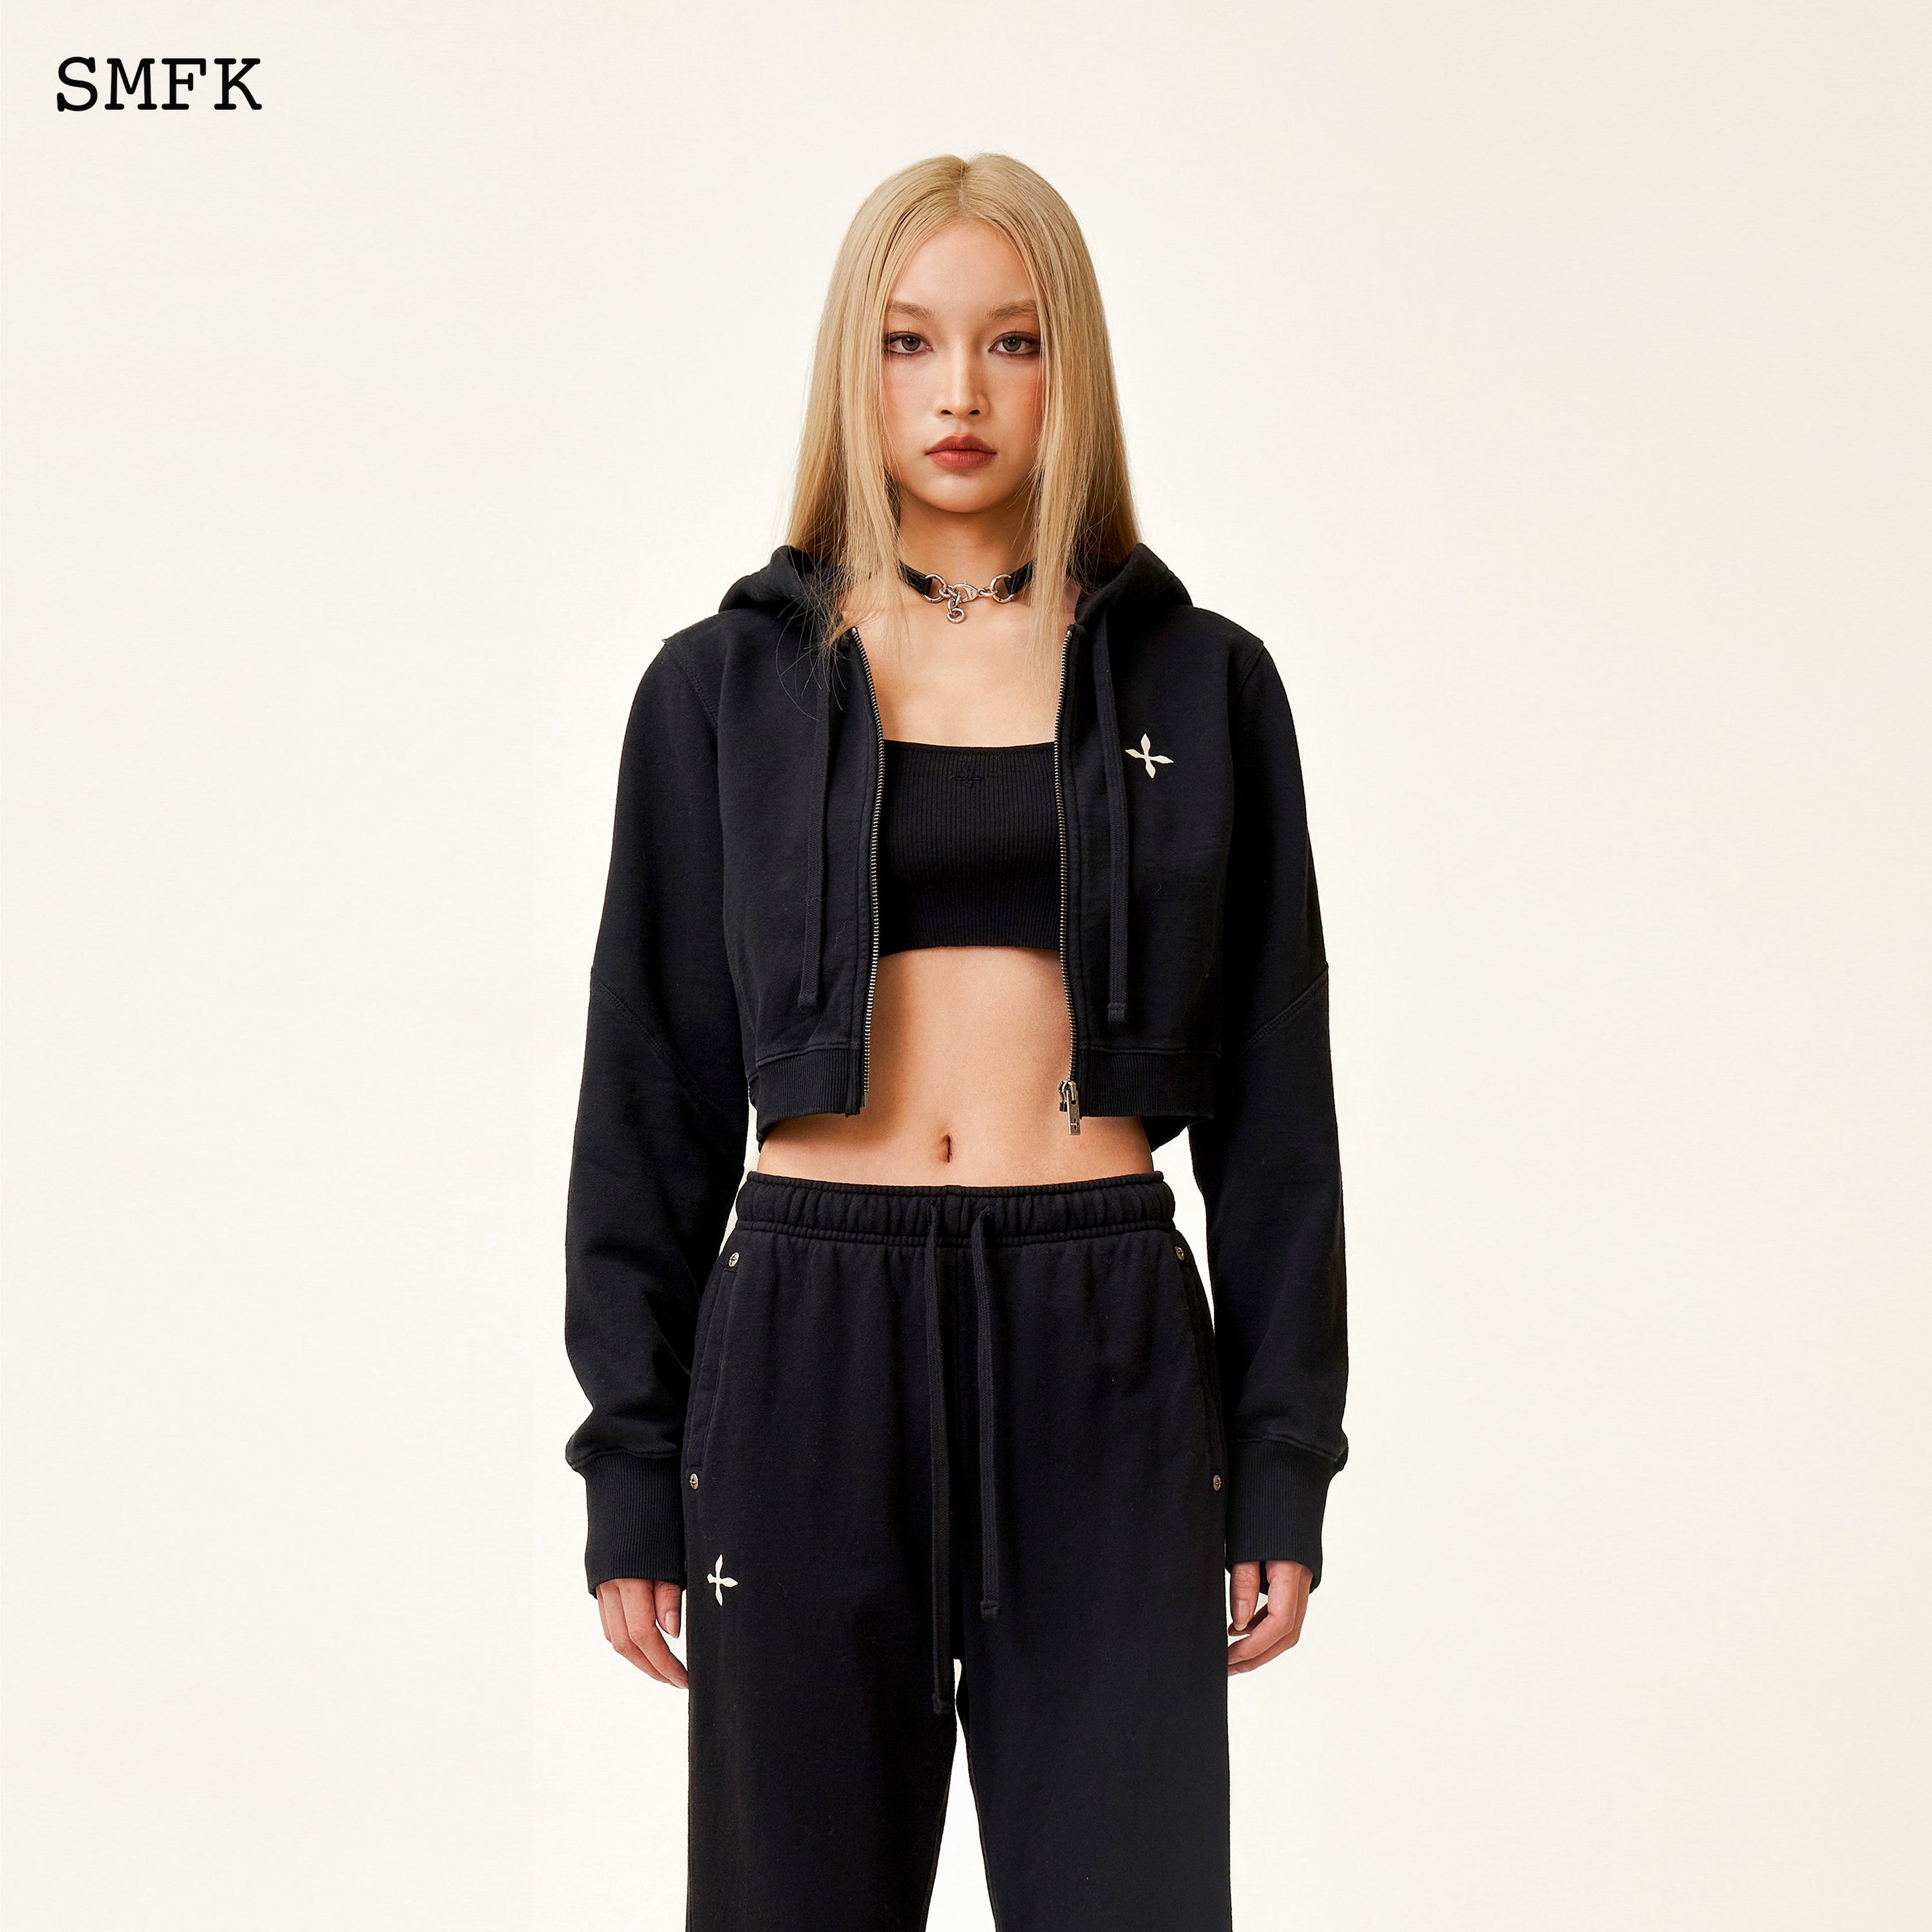 Compass Cross Classic Flared Sweatpants Black - SMFK Official